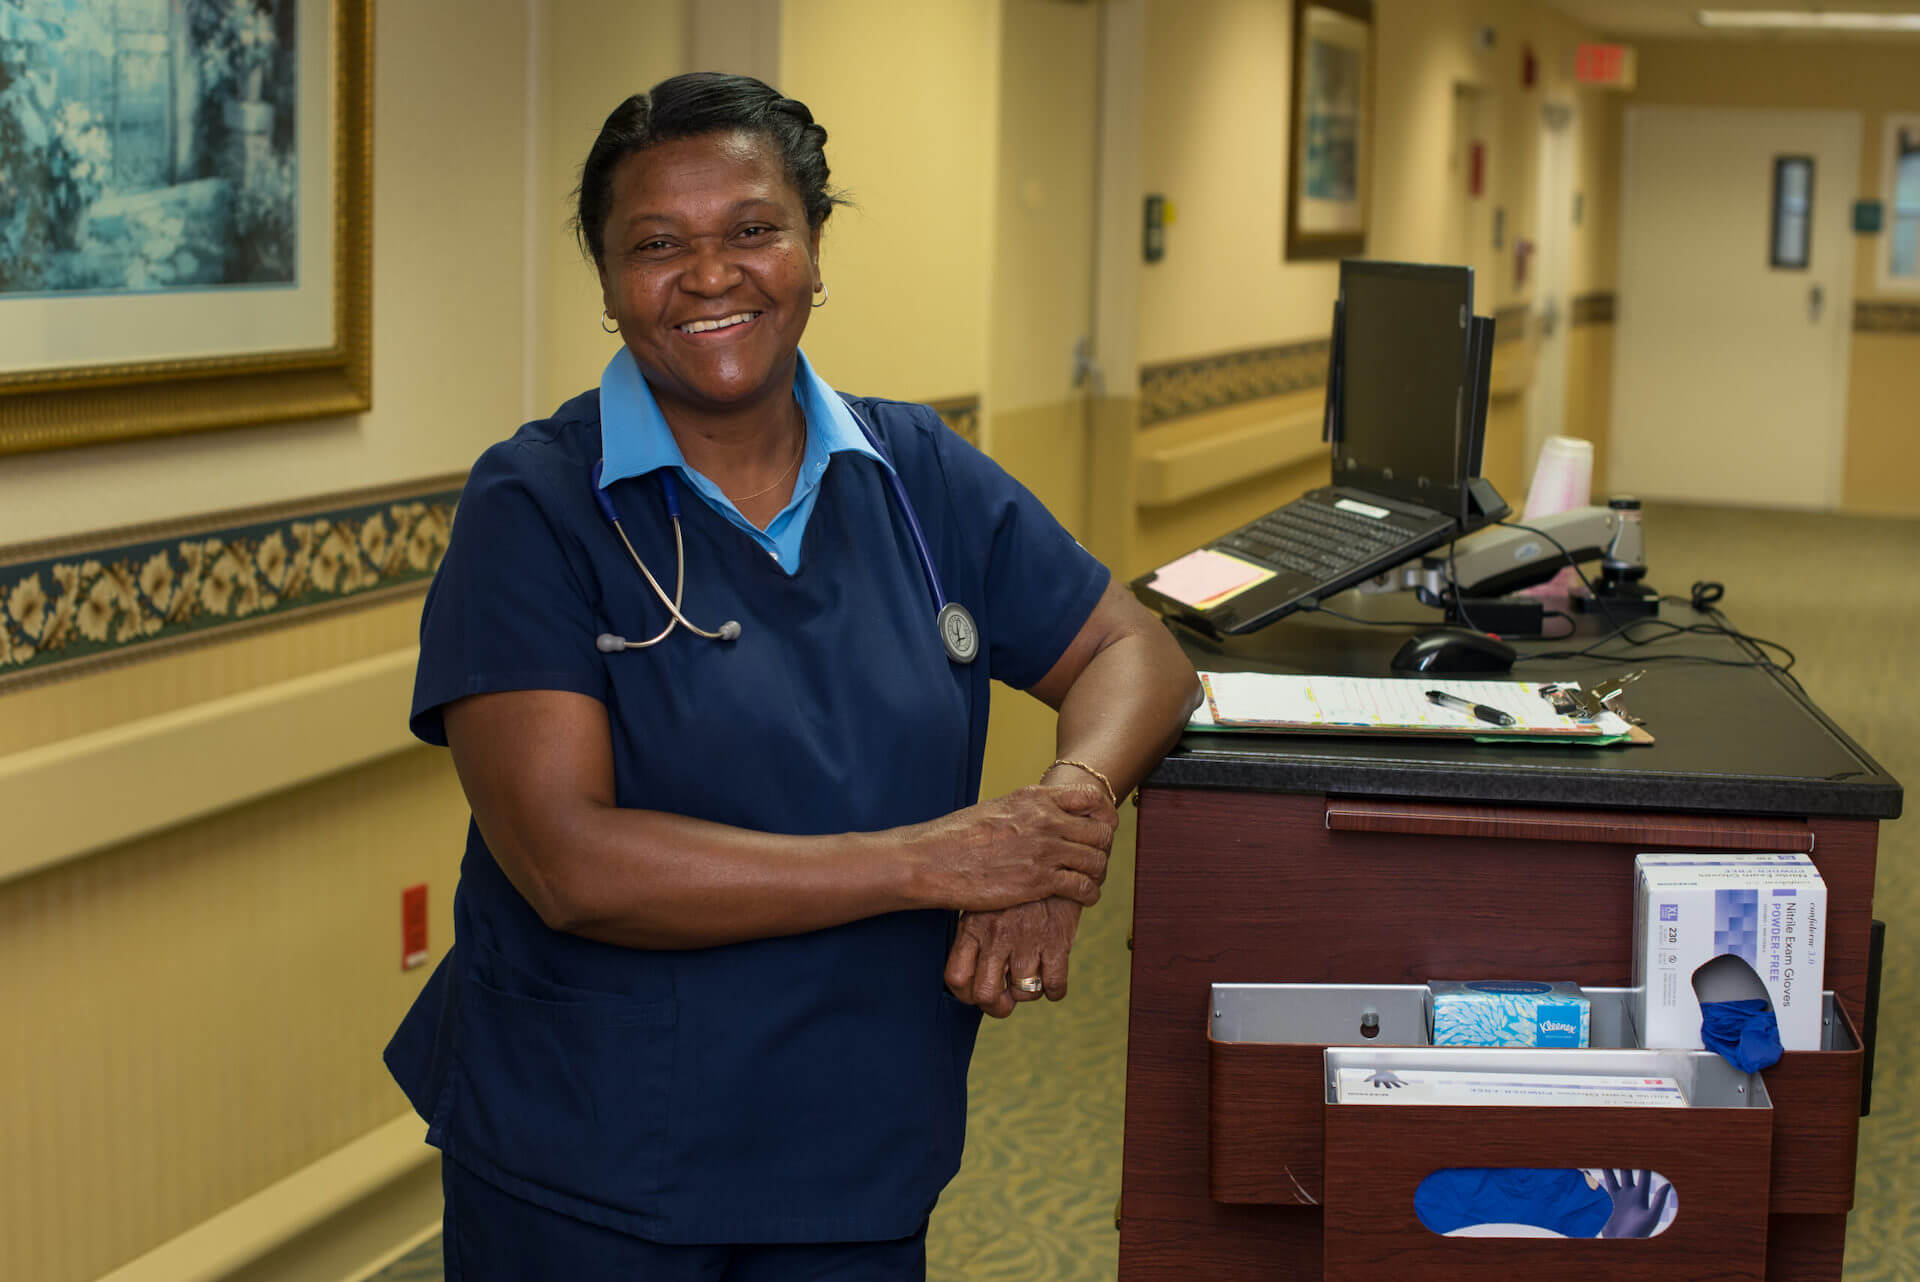 Nurse smiling and standing next to work station.